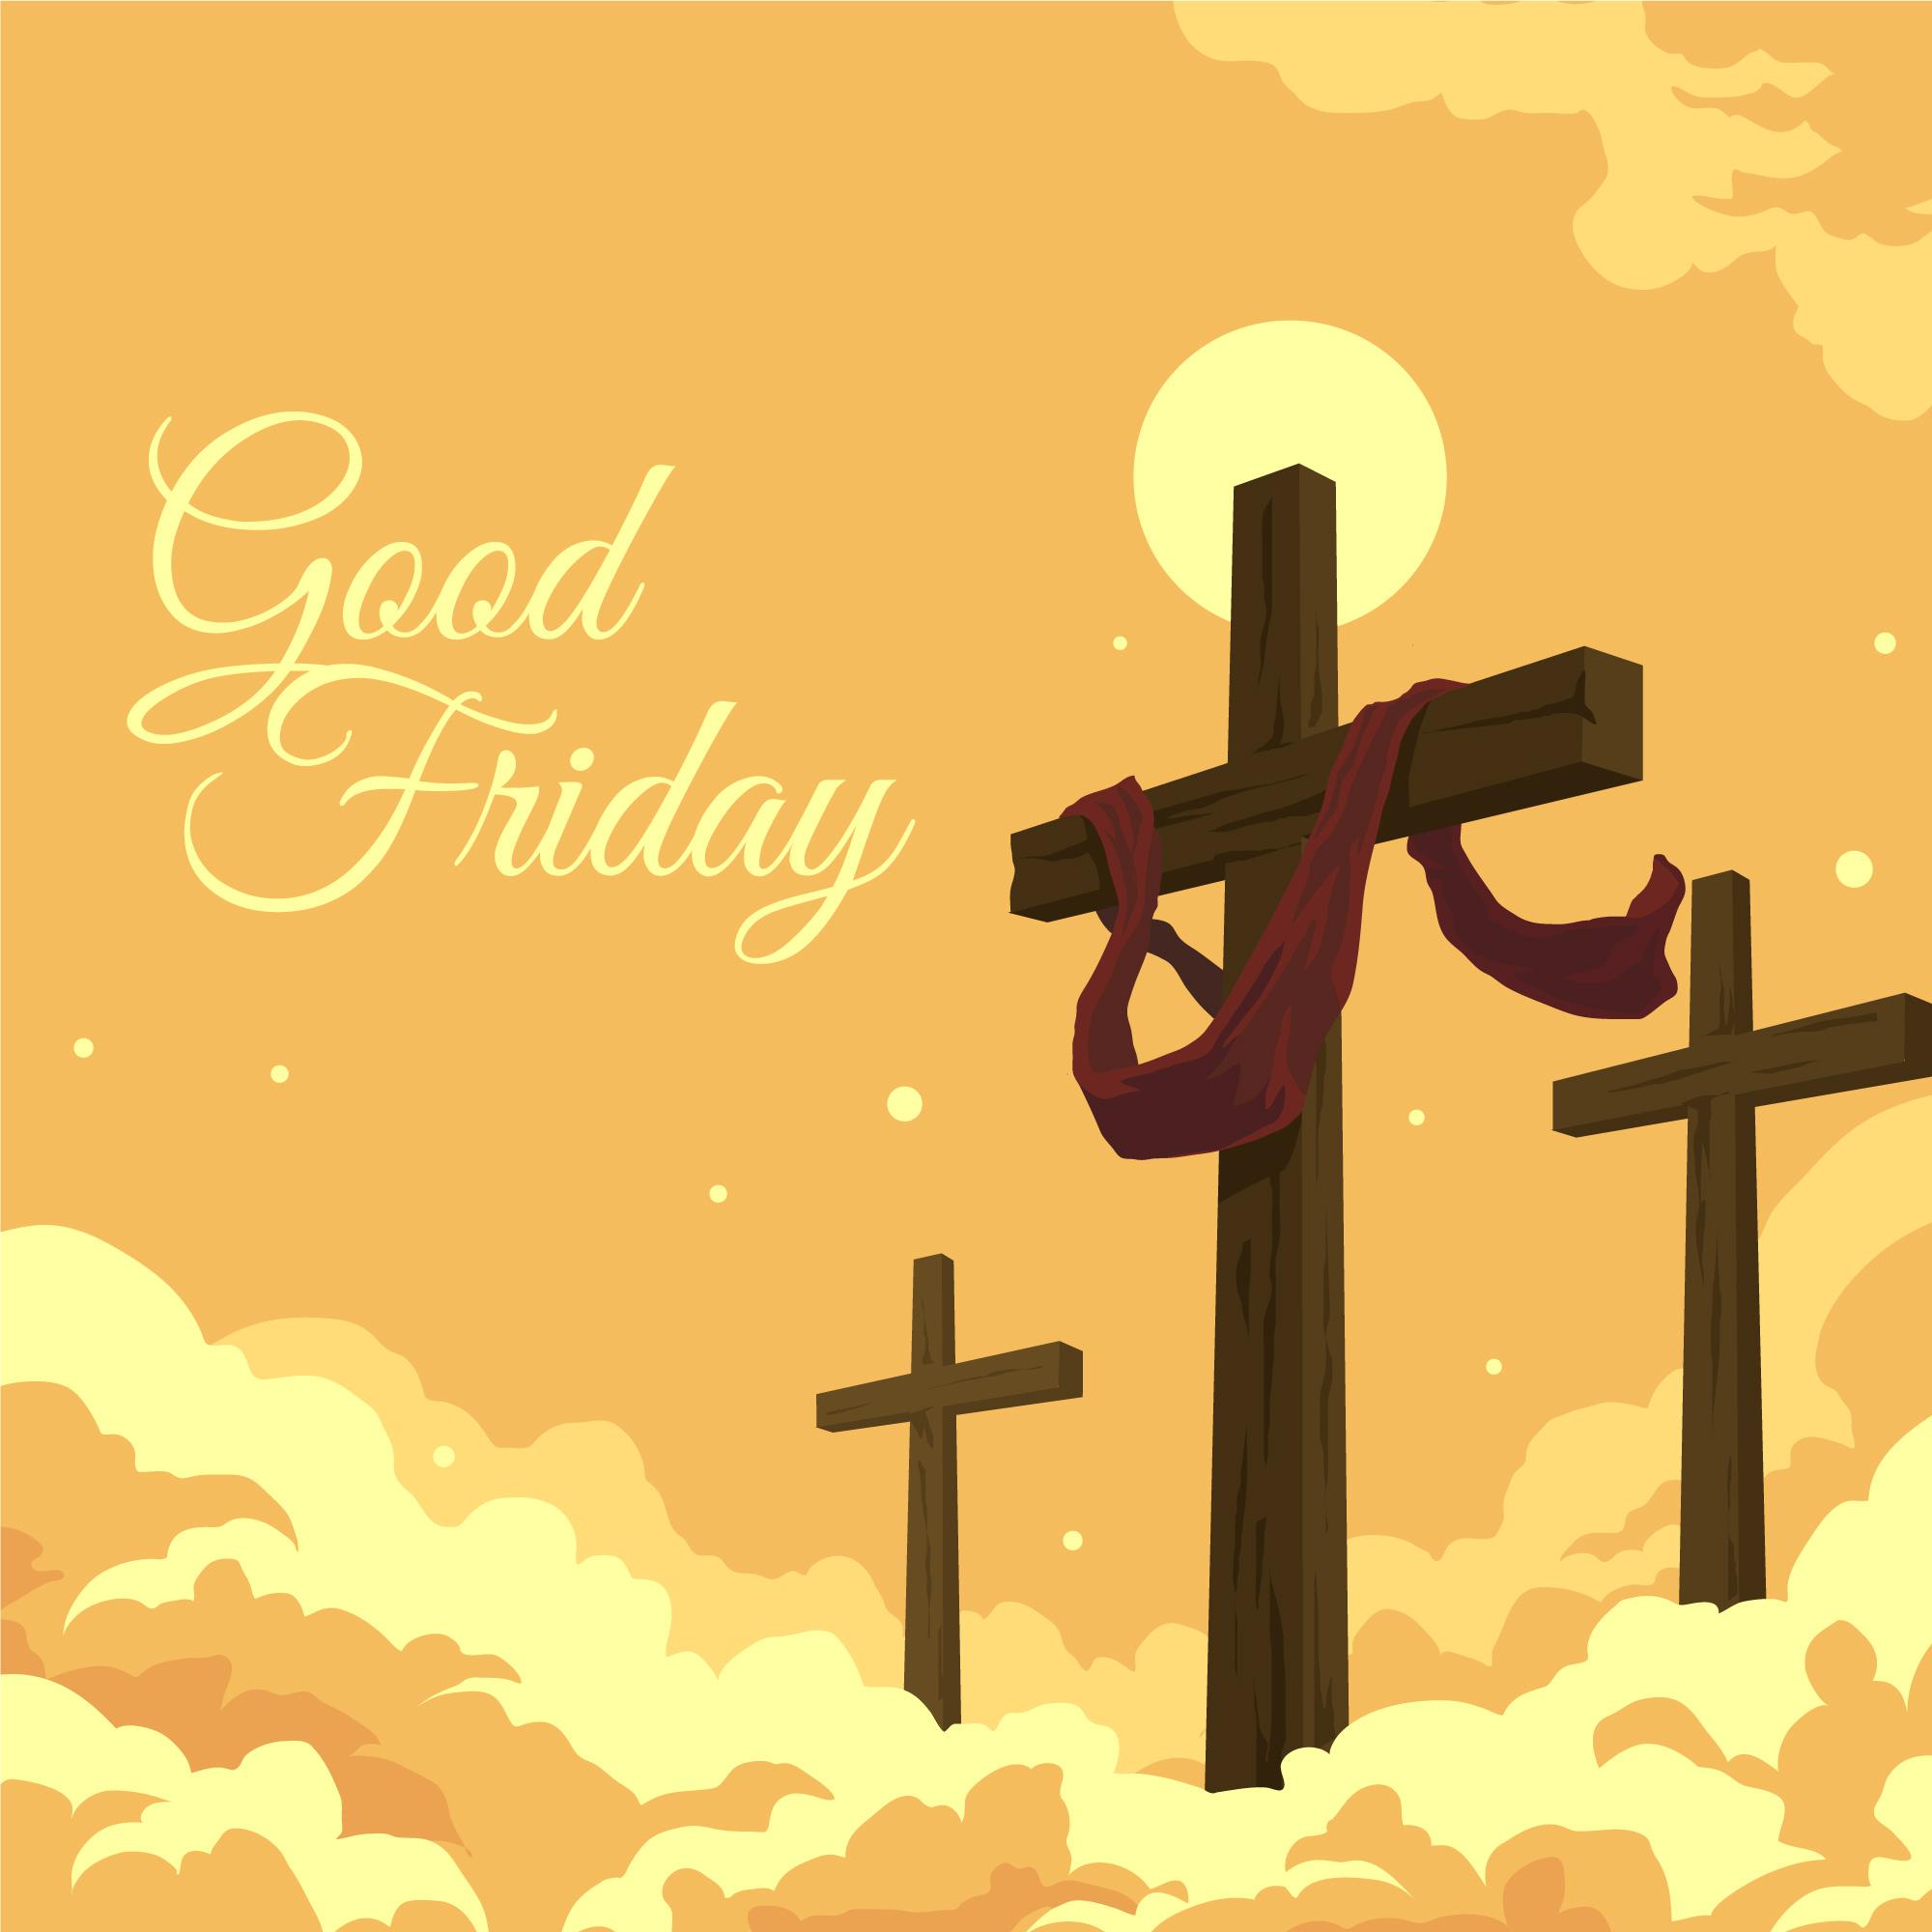 Good Friday 2021 Wishes, Messages, Greetings, Quotes, and Images to Share